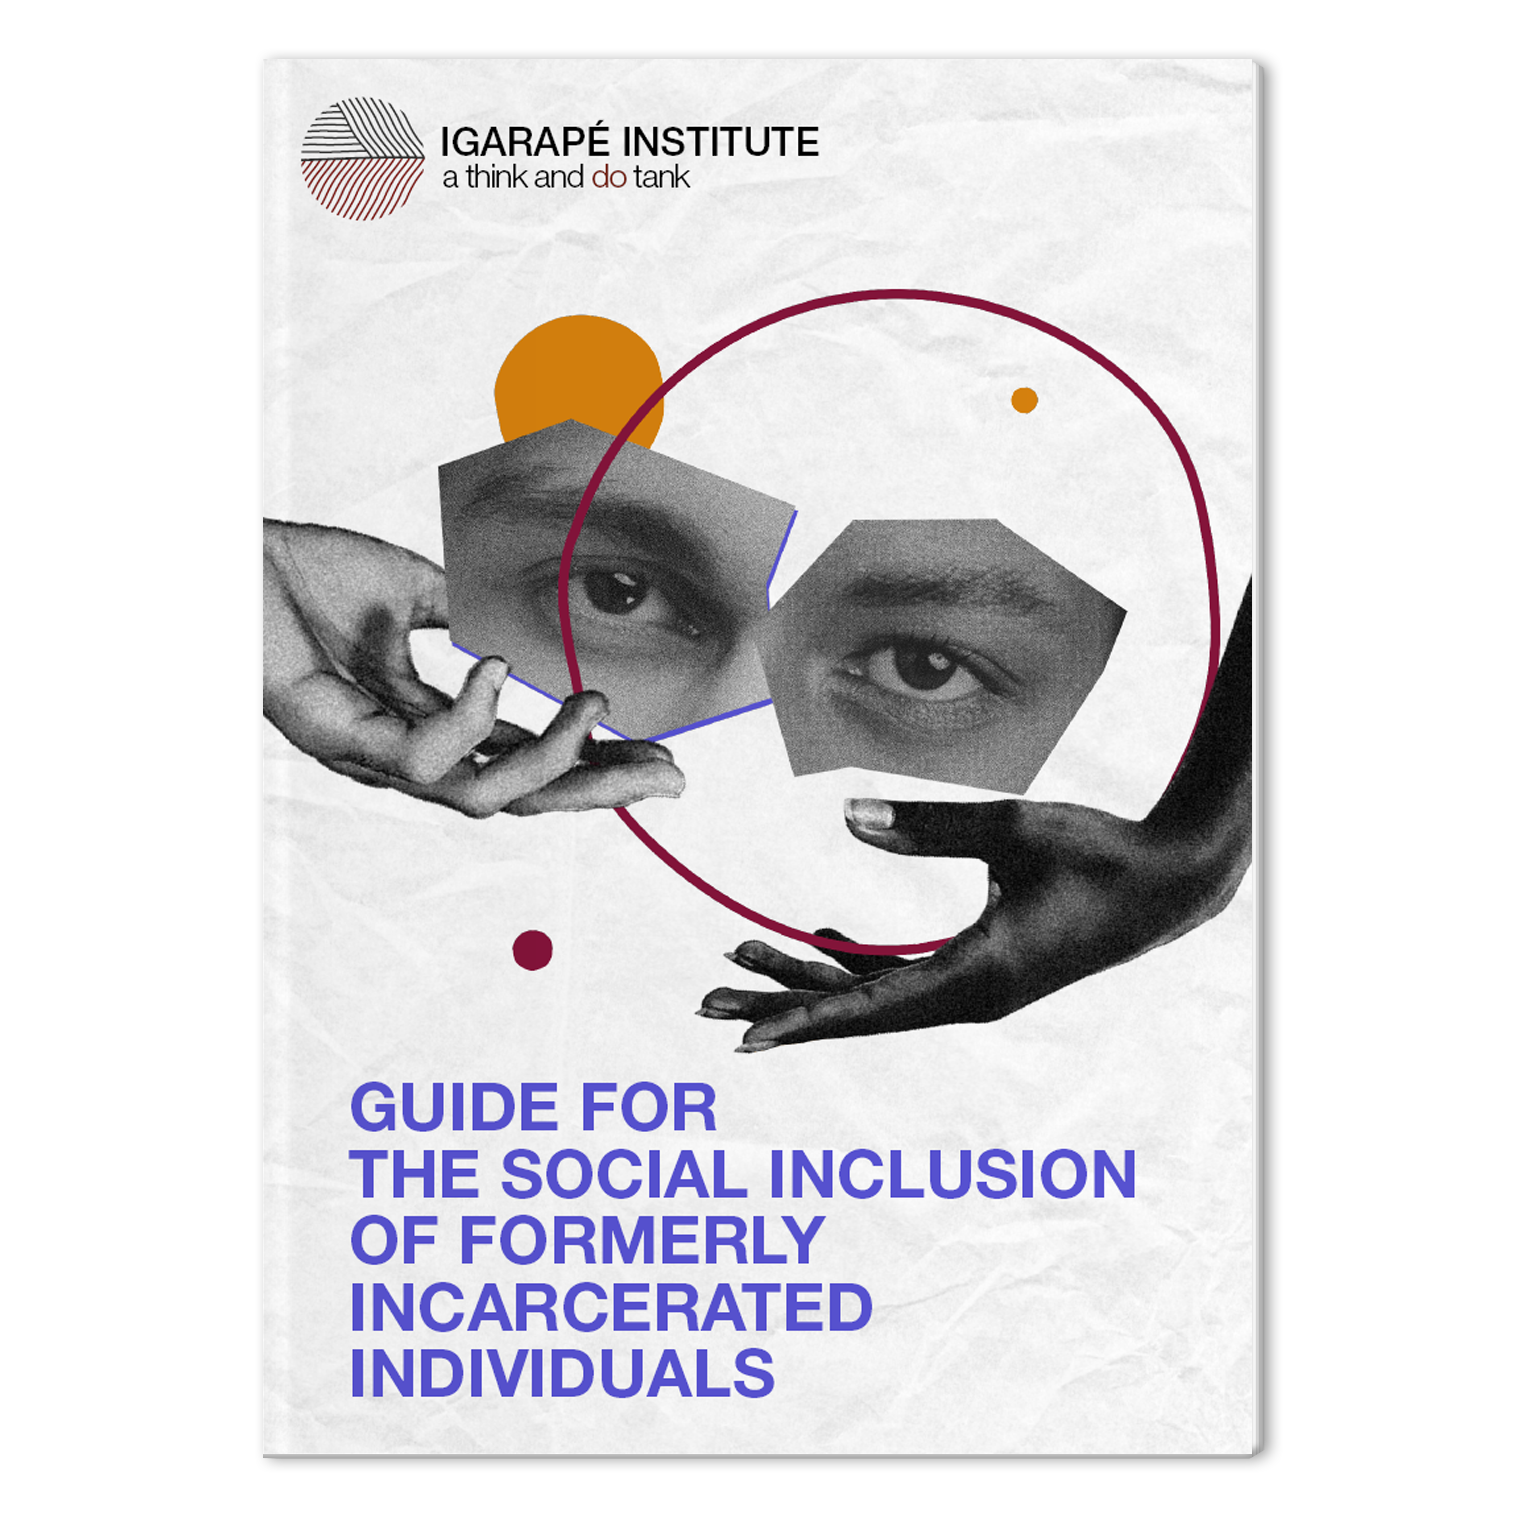 Social inclusion of formerly incarcerated individuals